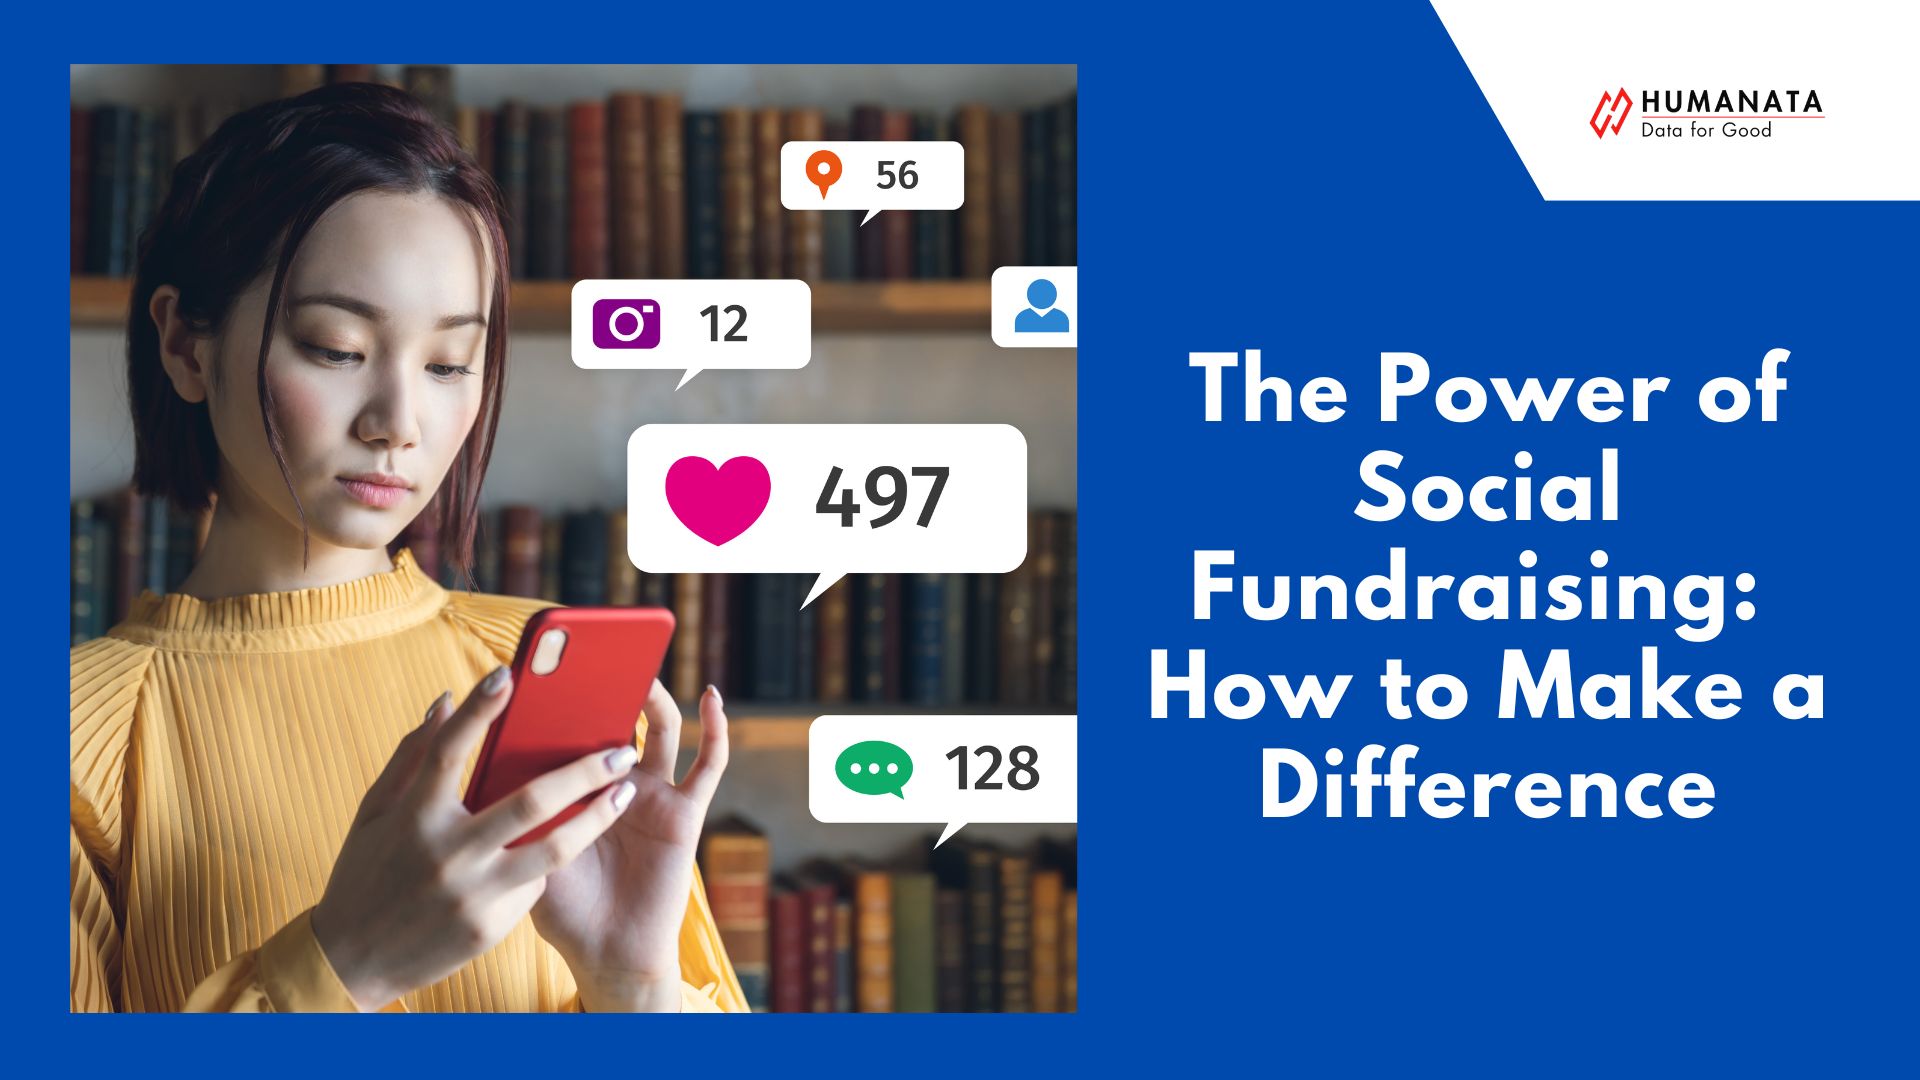 The Power of Social Fundraising: How to Make a Difference